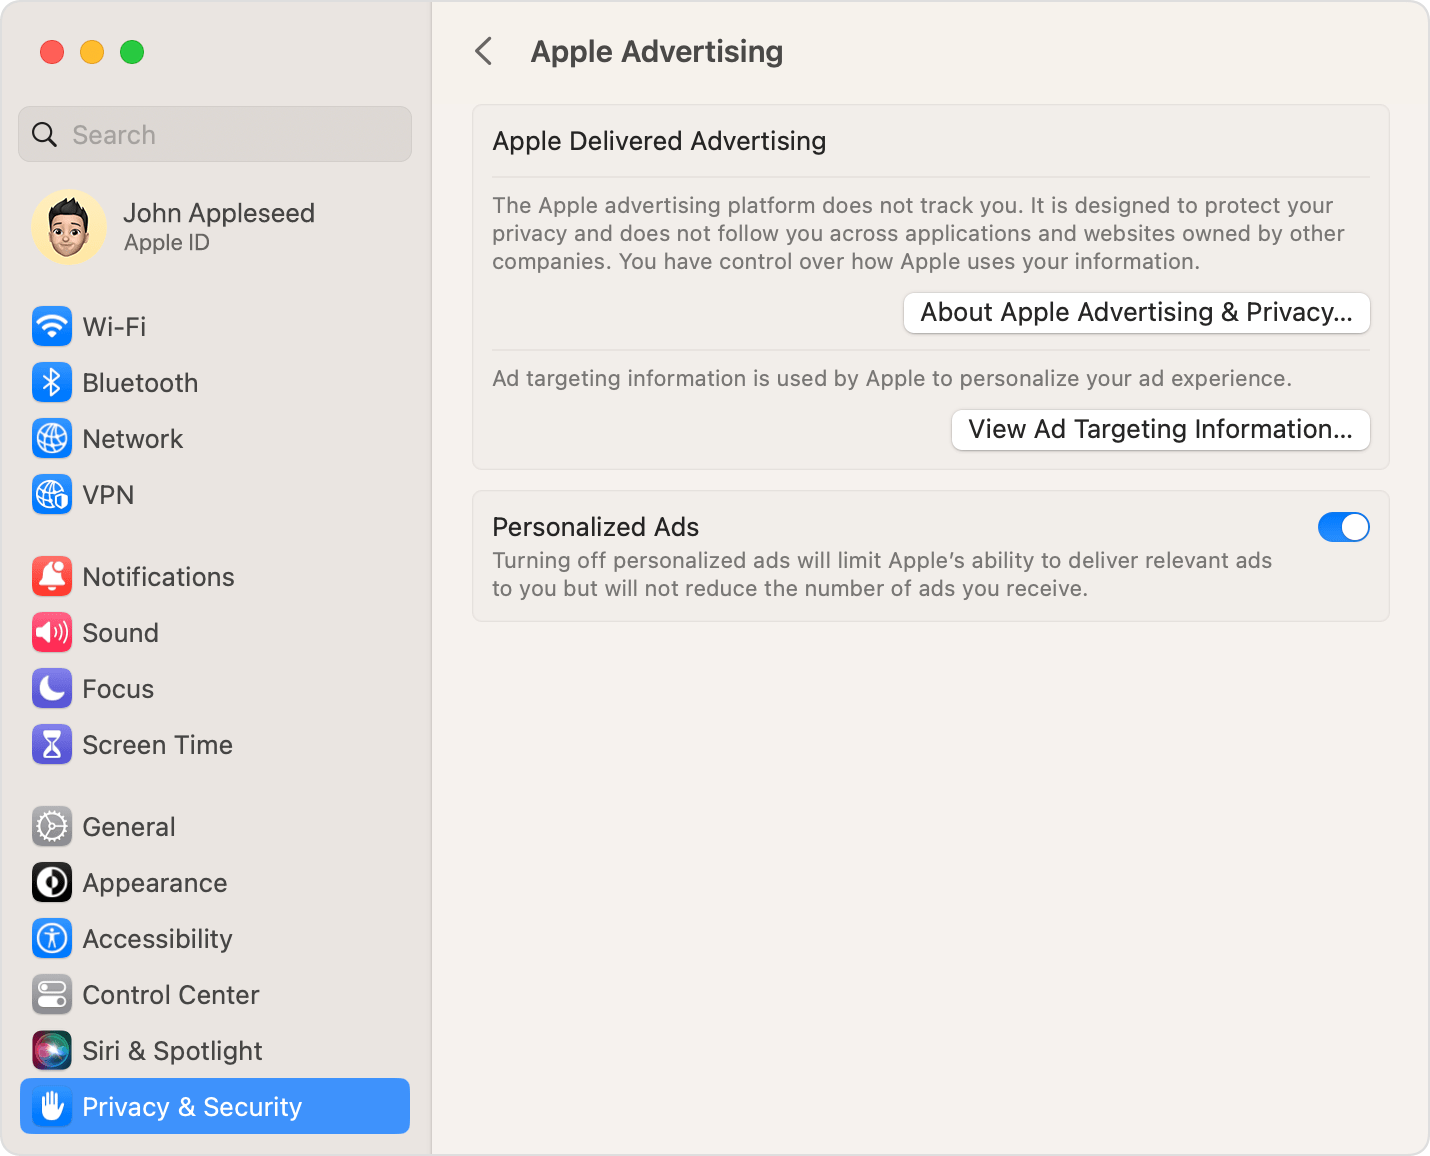 In macOS System Settings, turn off personalised ads